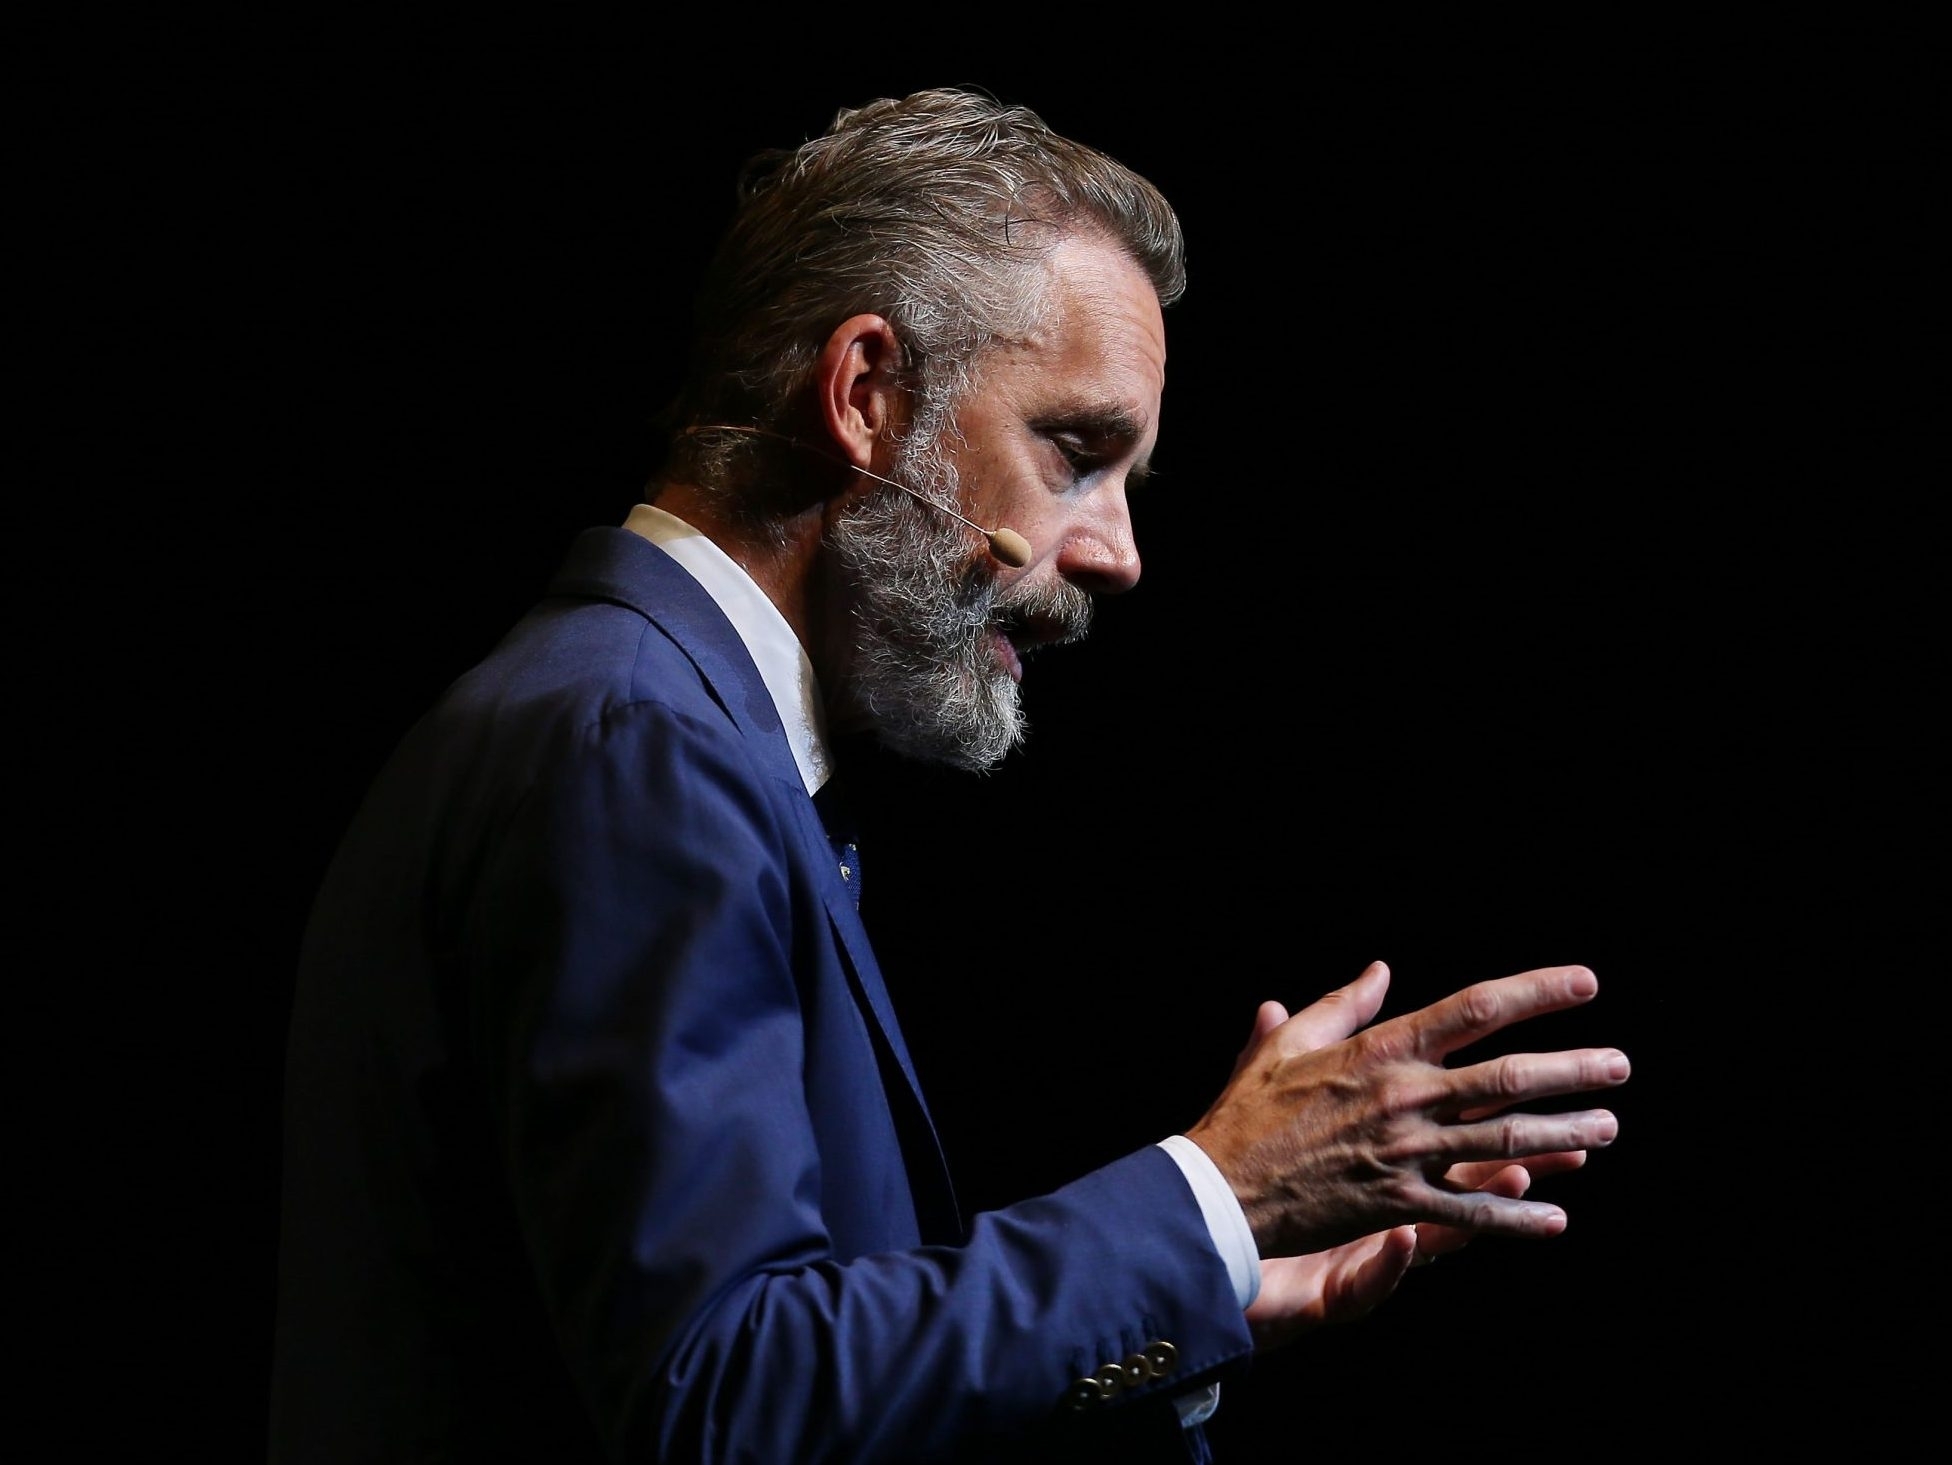 Jordan Peterson is being disciplined for his tweets. Why some say that  raises free speech issues